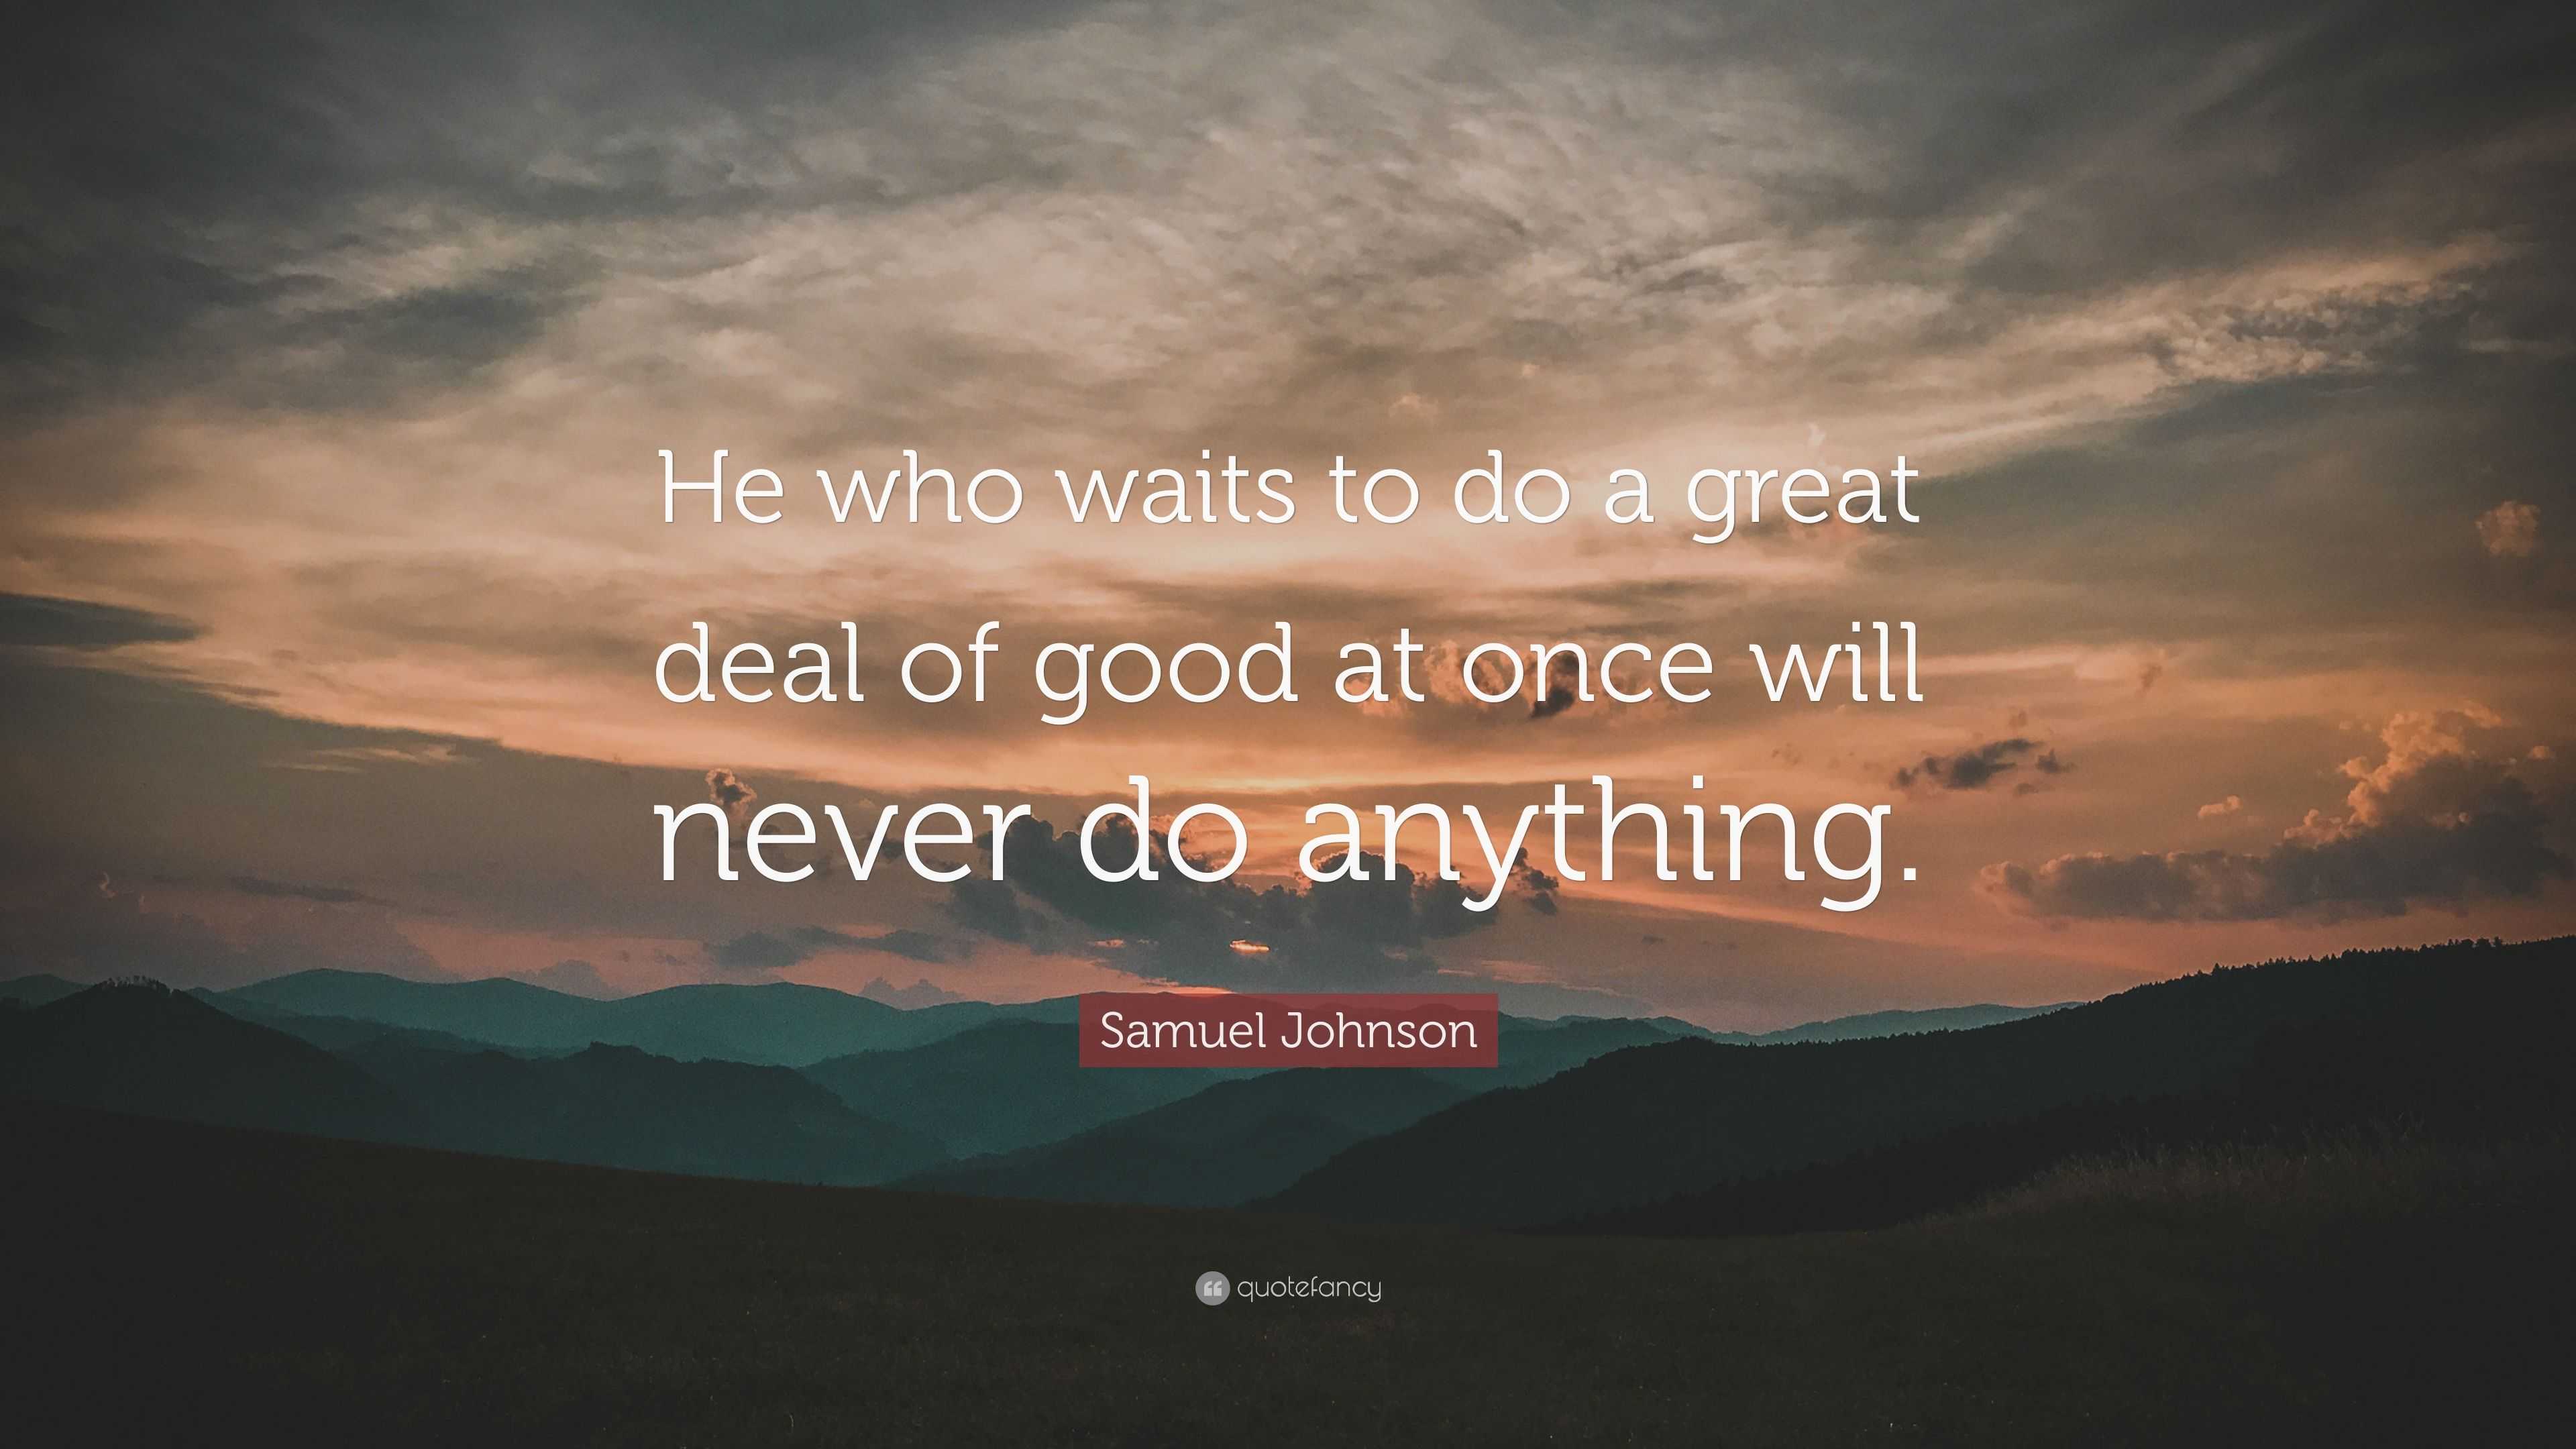 Samuel Johnson Quote: “He who waits to do a great deal of good at once